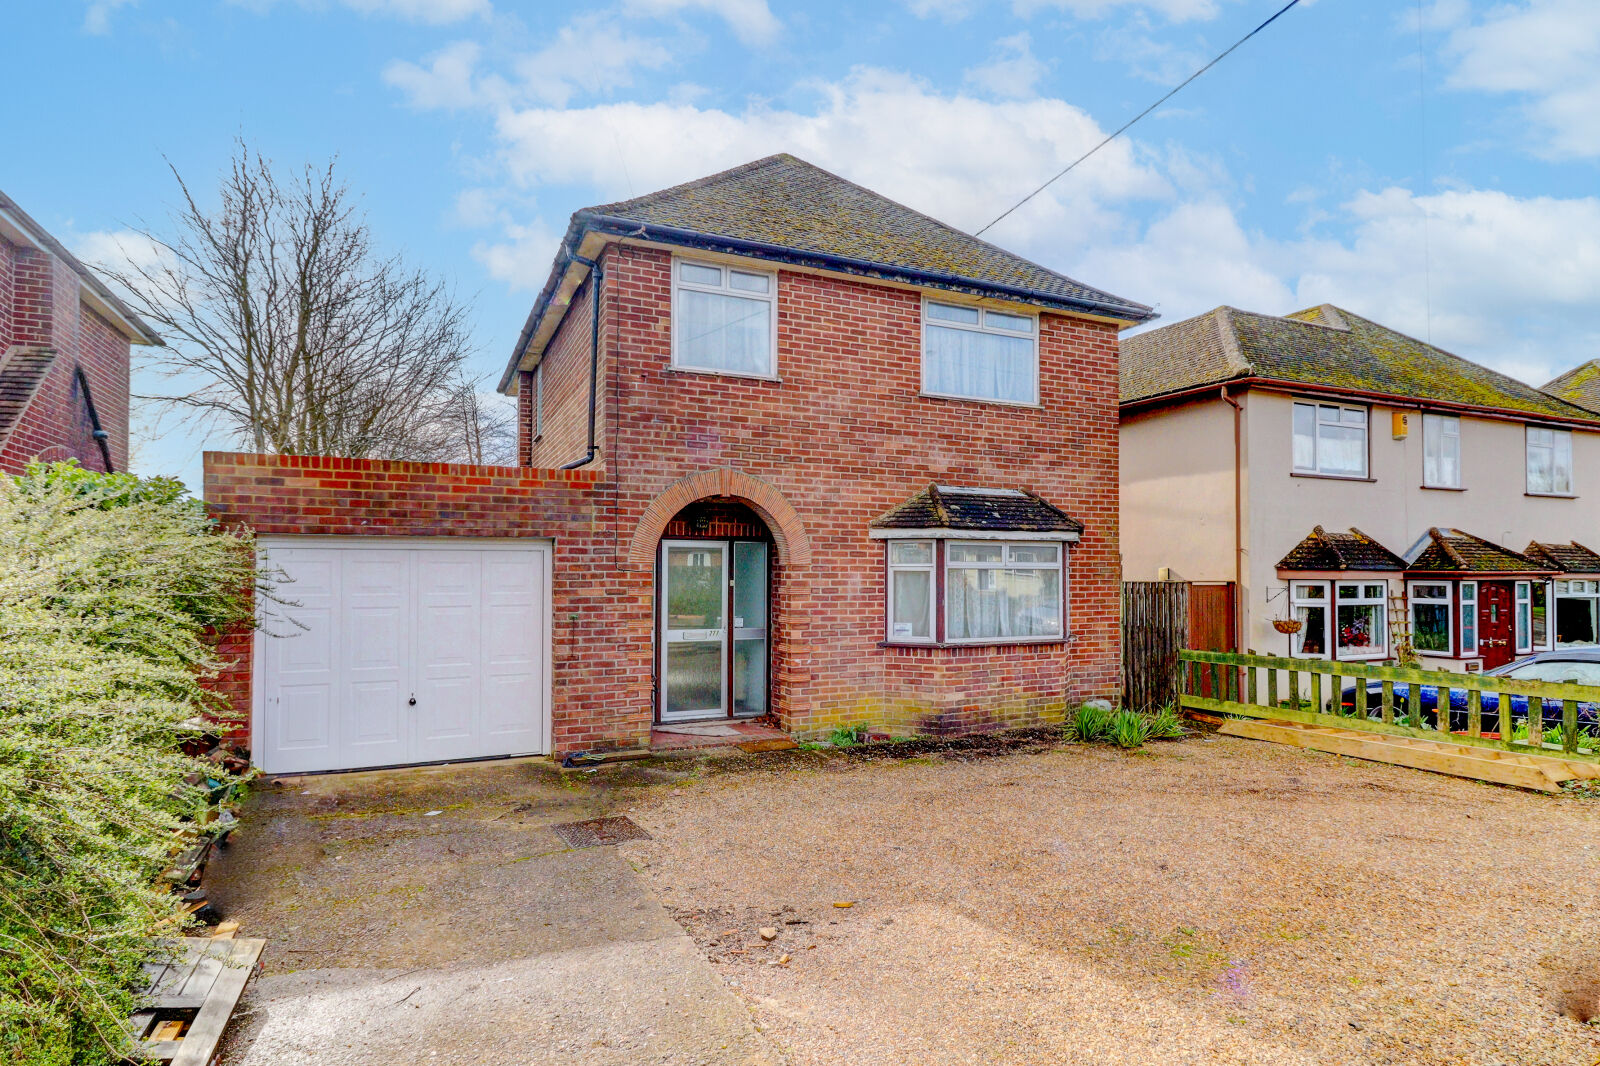 3 bedroom detached house for sale Cressex Road, High Wycombe, HP12, main image